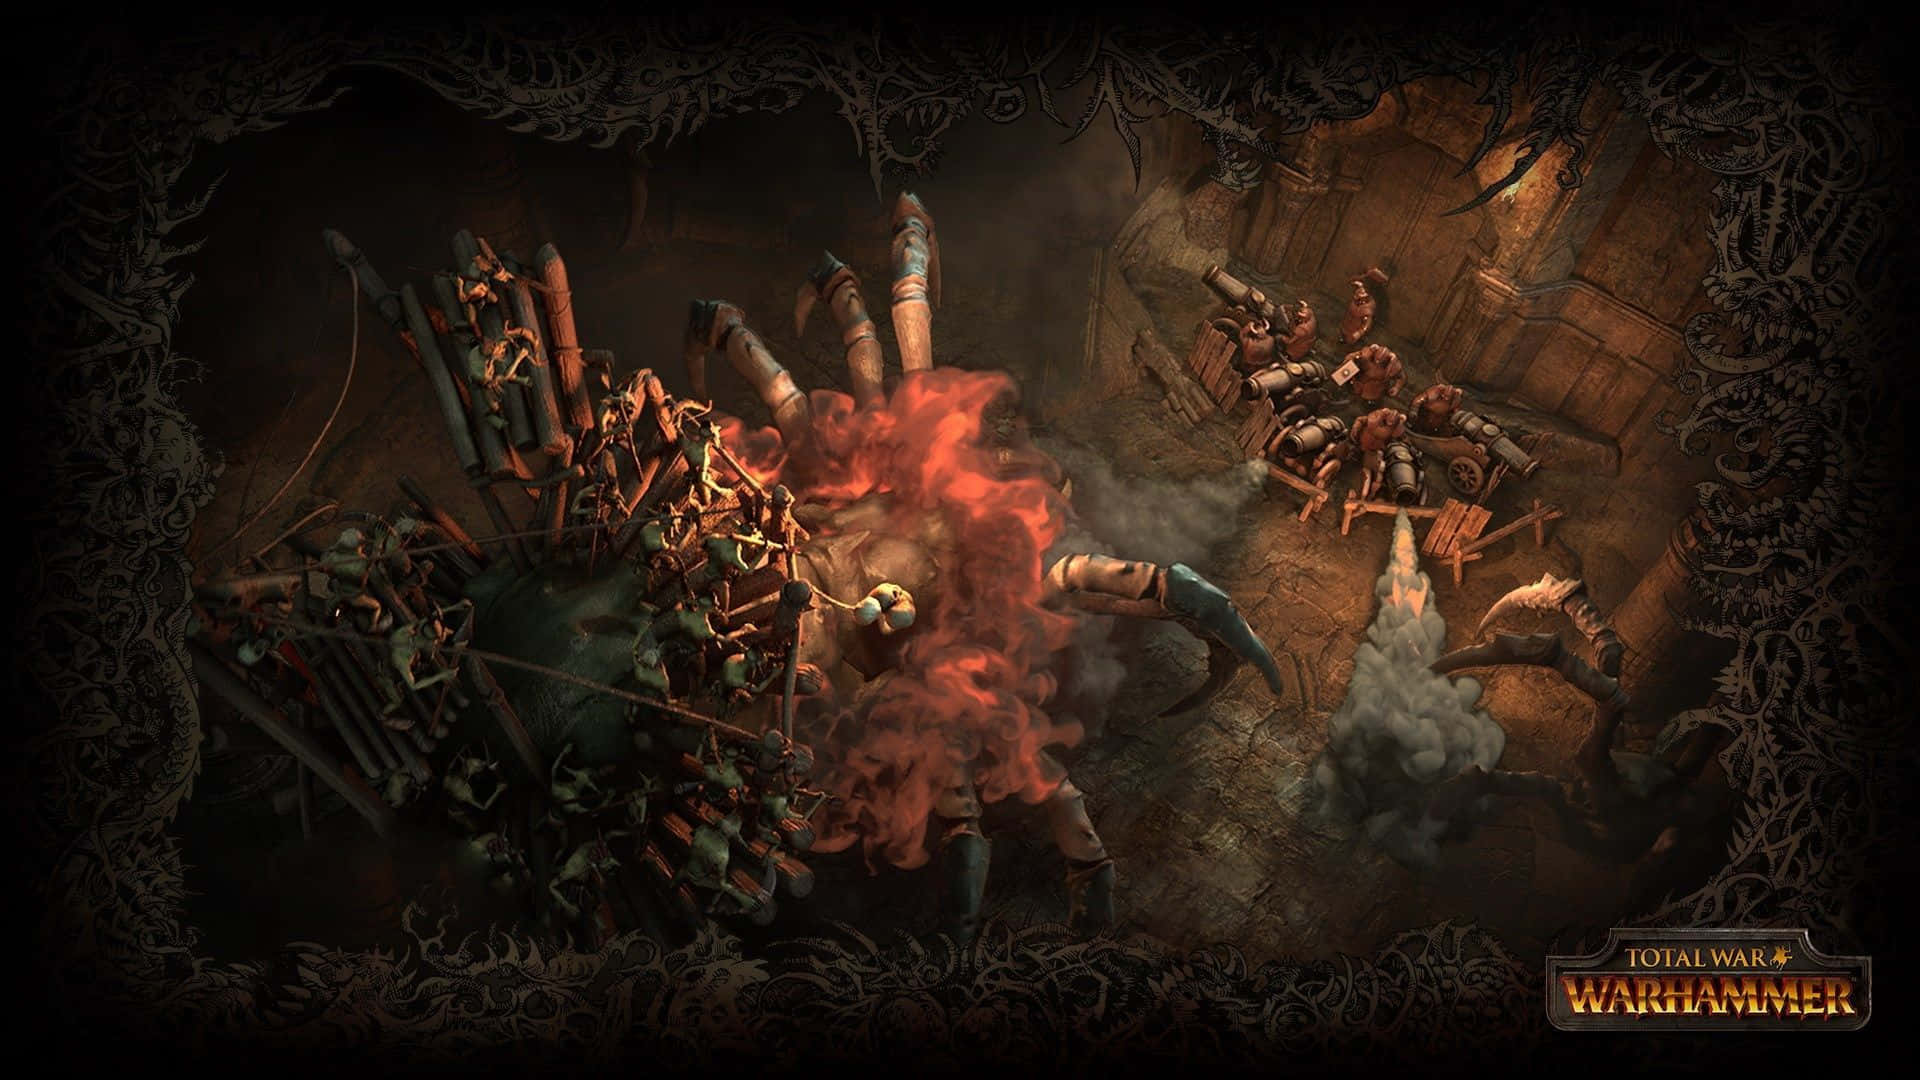 Conquer the Old World on the Battlefield with Total War: Warhammer